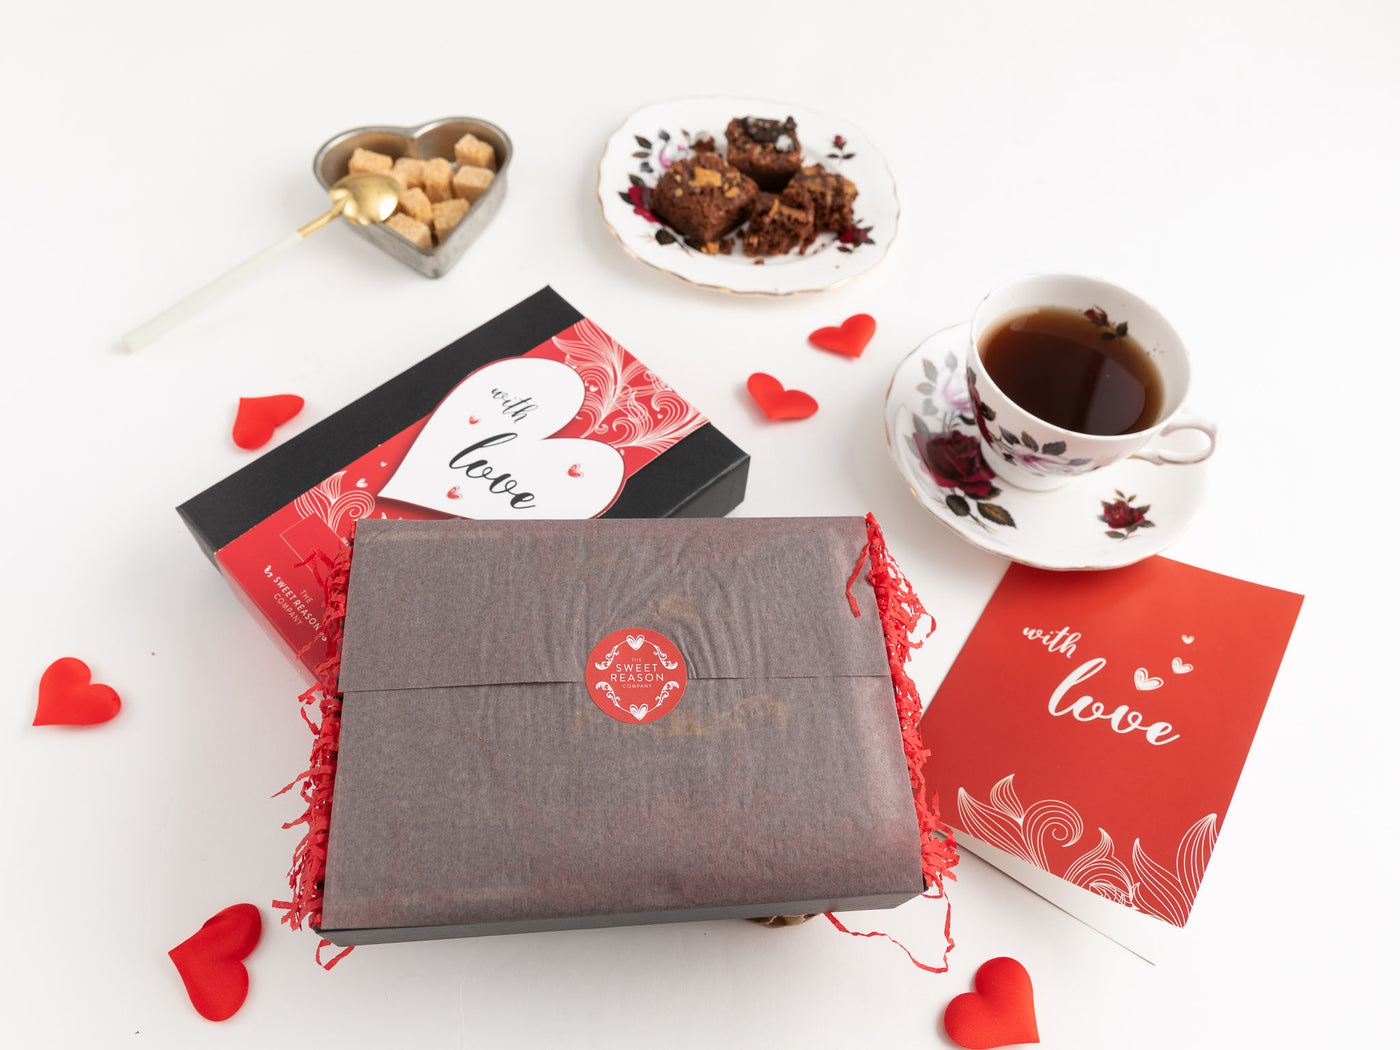 With Love Afternoon Tea for Four for 6 Months Gift